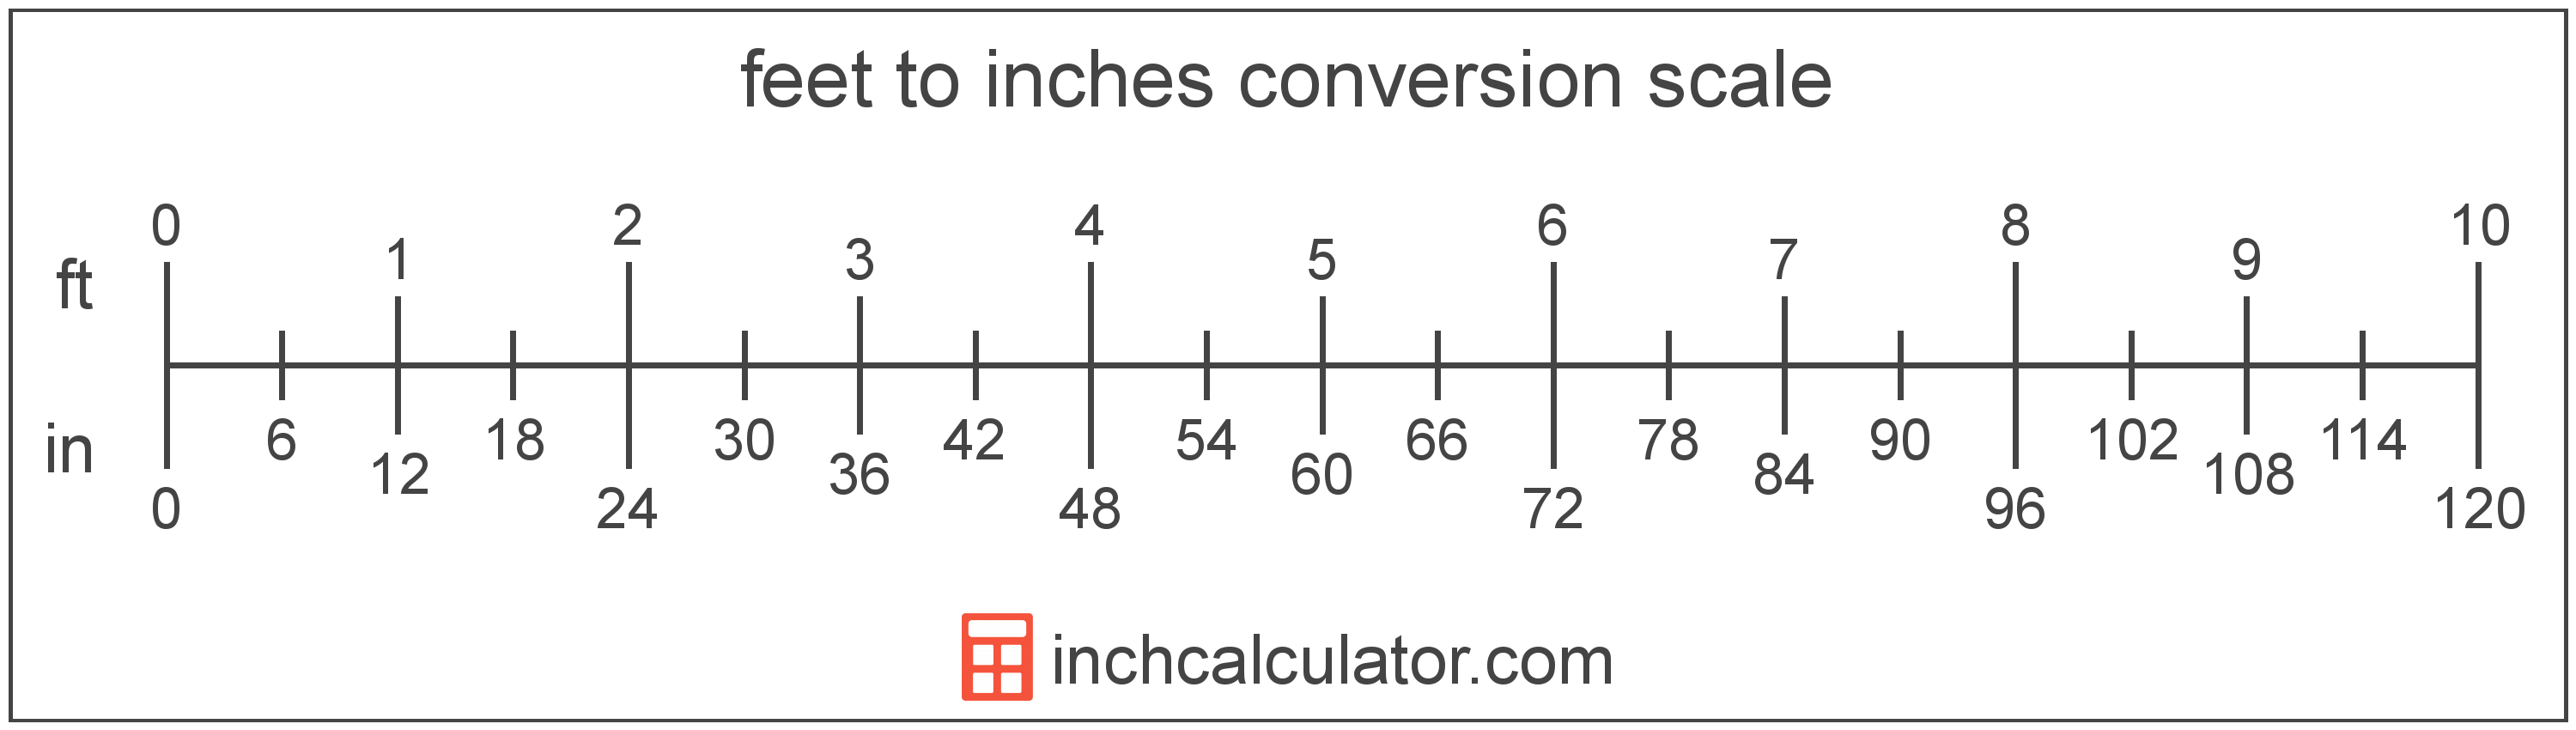 Convert Feet to Inches | Length Measurement Conversions 48 Feet Equals How Many Yards